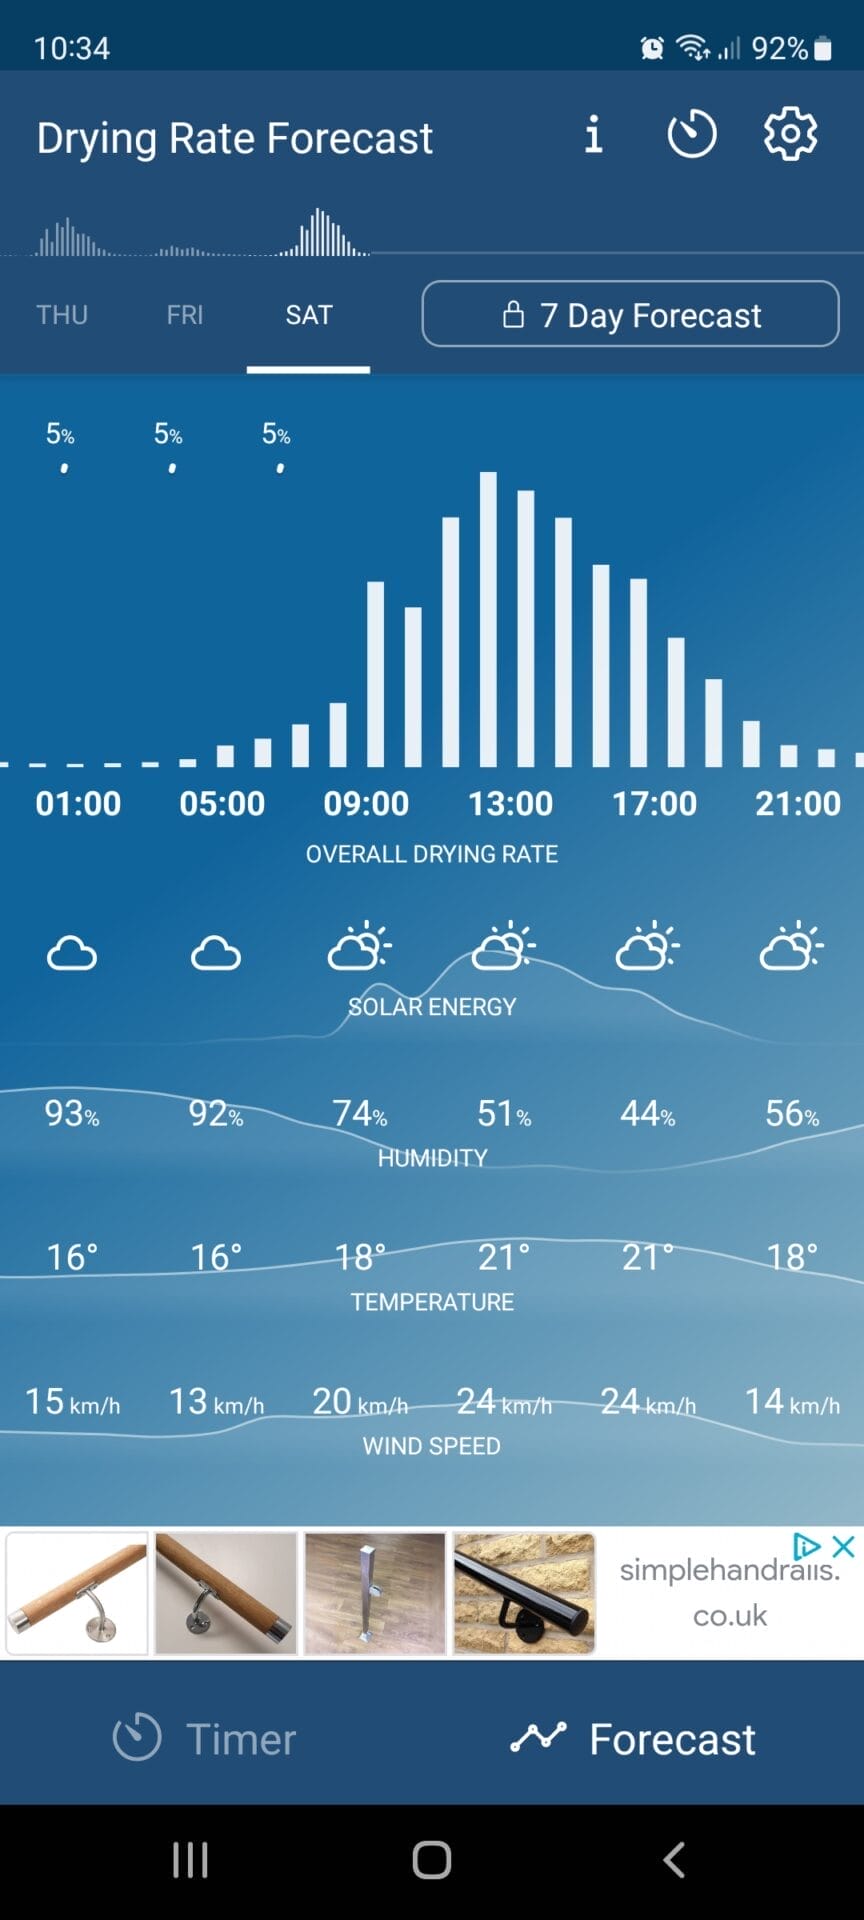 Image shows a screenshot for the Forecast page of the app.